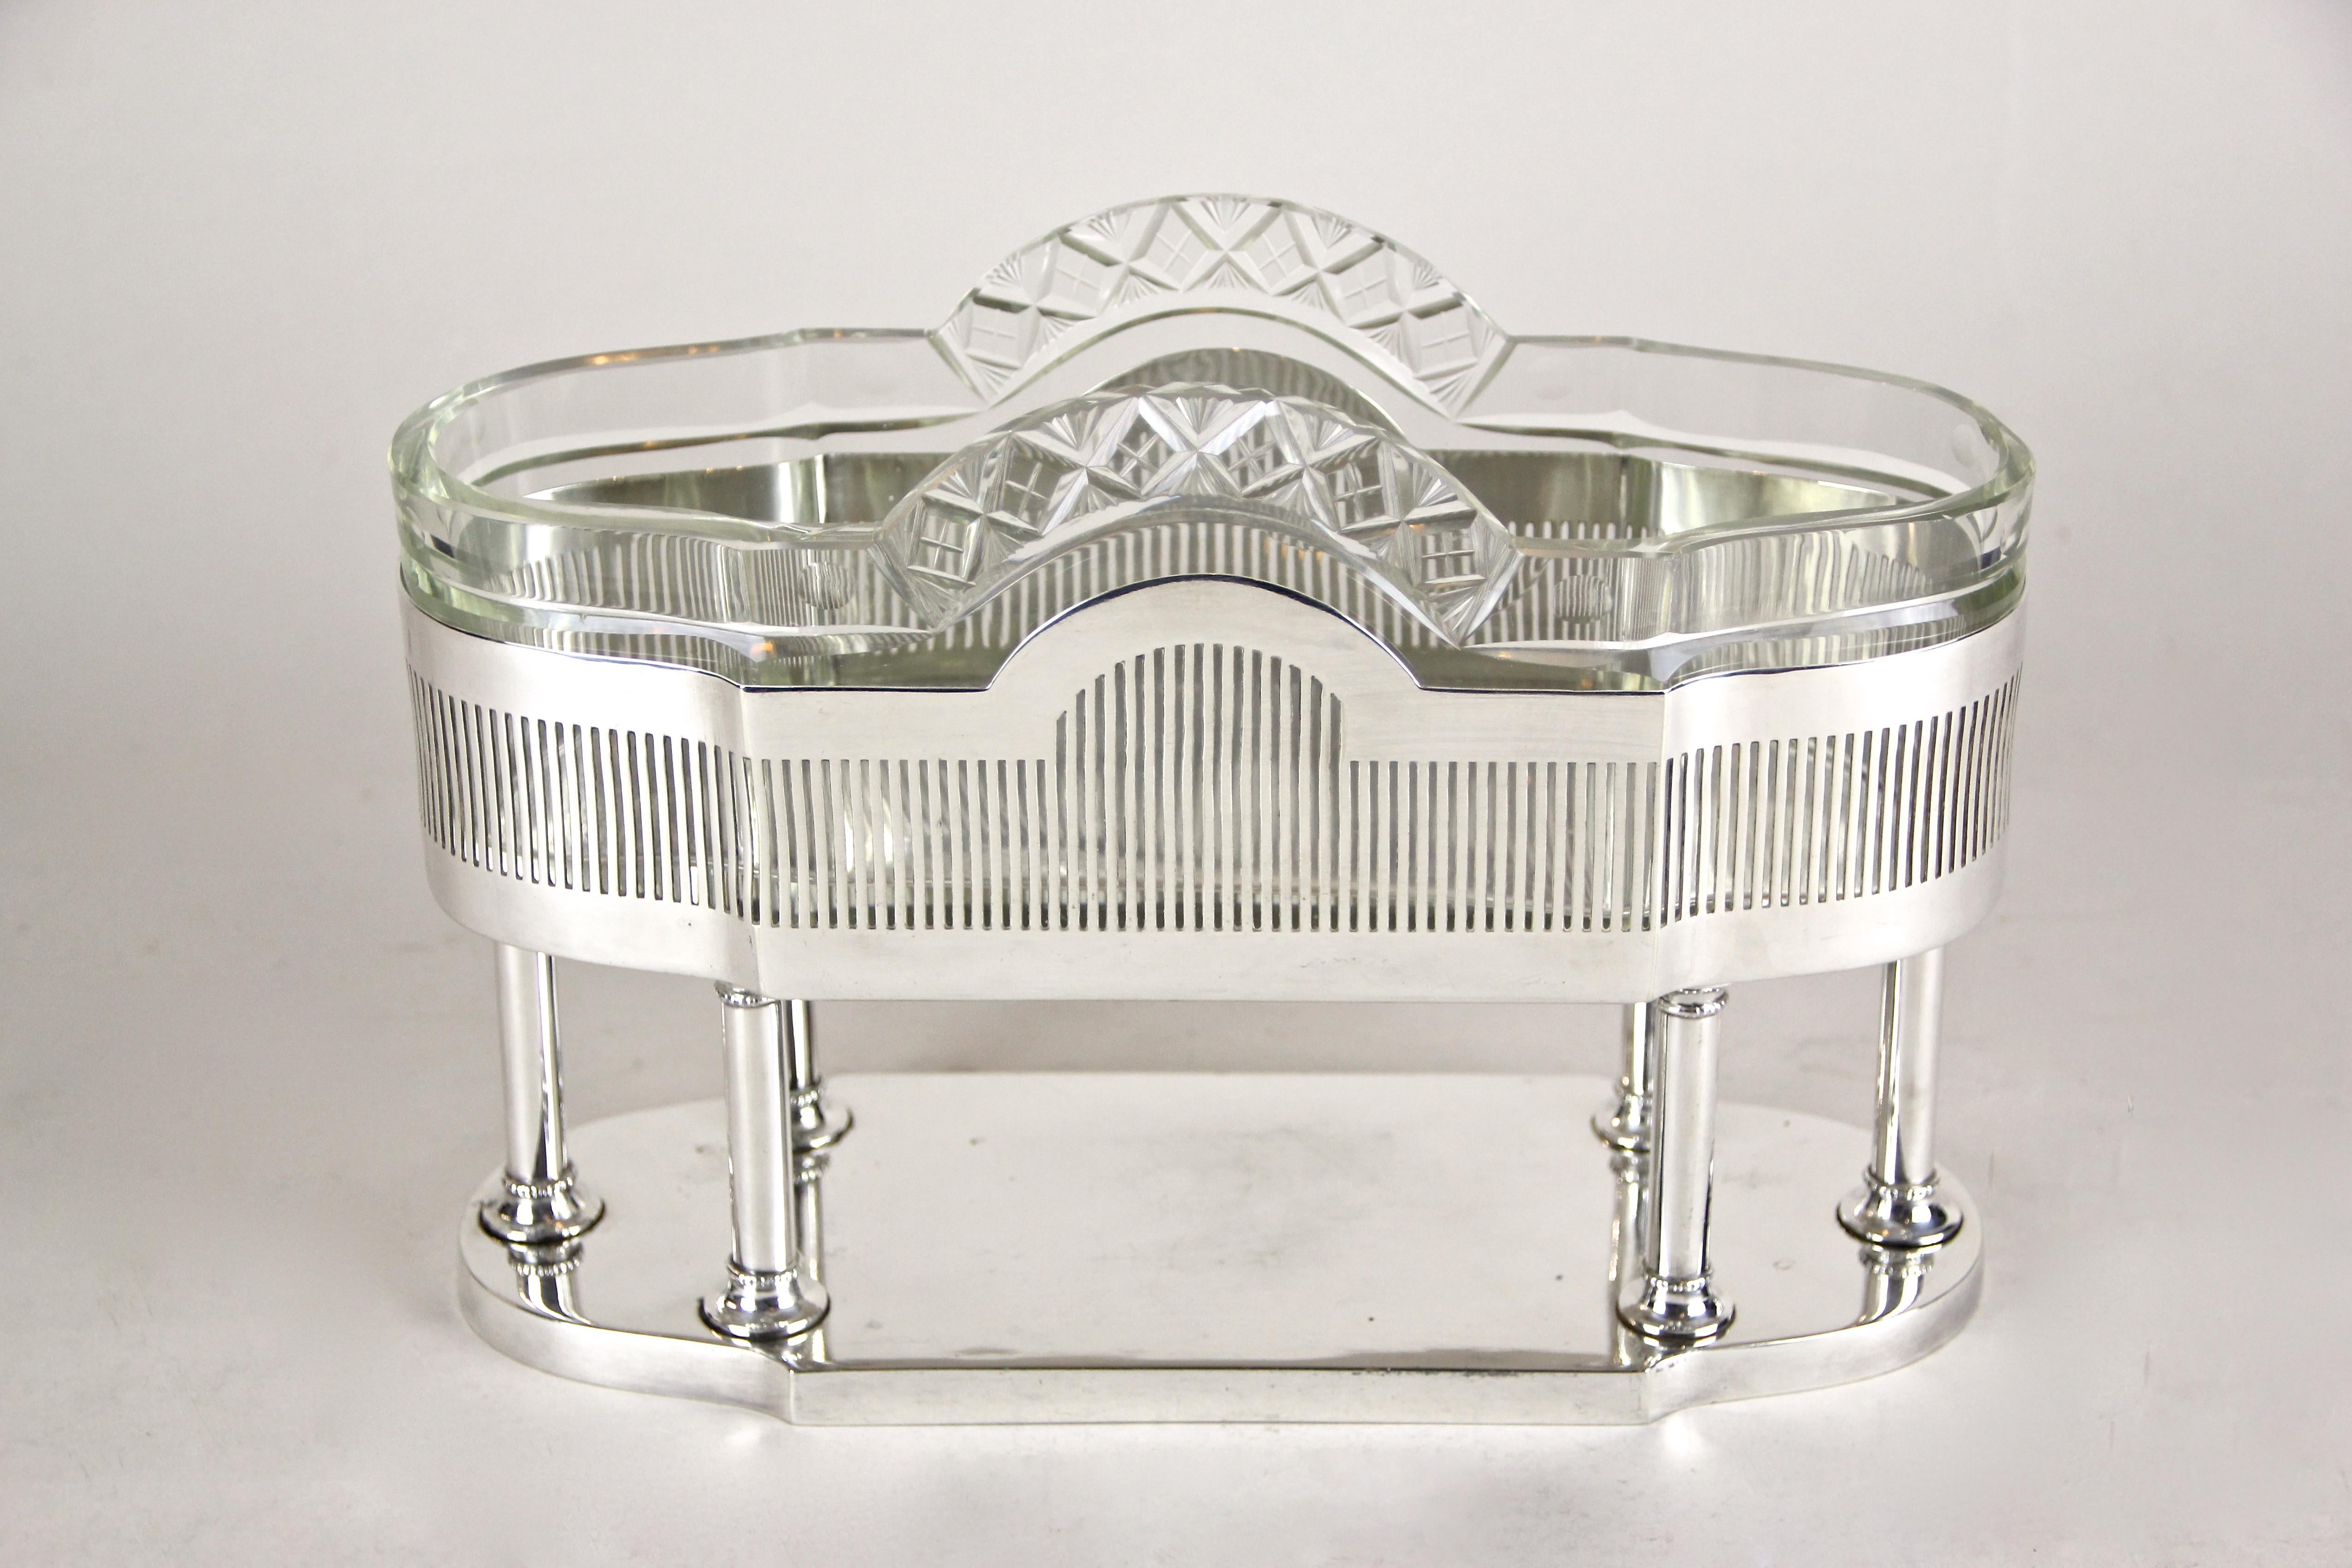 Outstanding silvered jardinière/ centerpiece with cut-glass bowl from the Art Nouveau period in Vienna/ Austria, made by the famous company of Argentor, circa 1905. The lovely designed masterpiece was made of Fine silvered brass and shows the